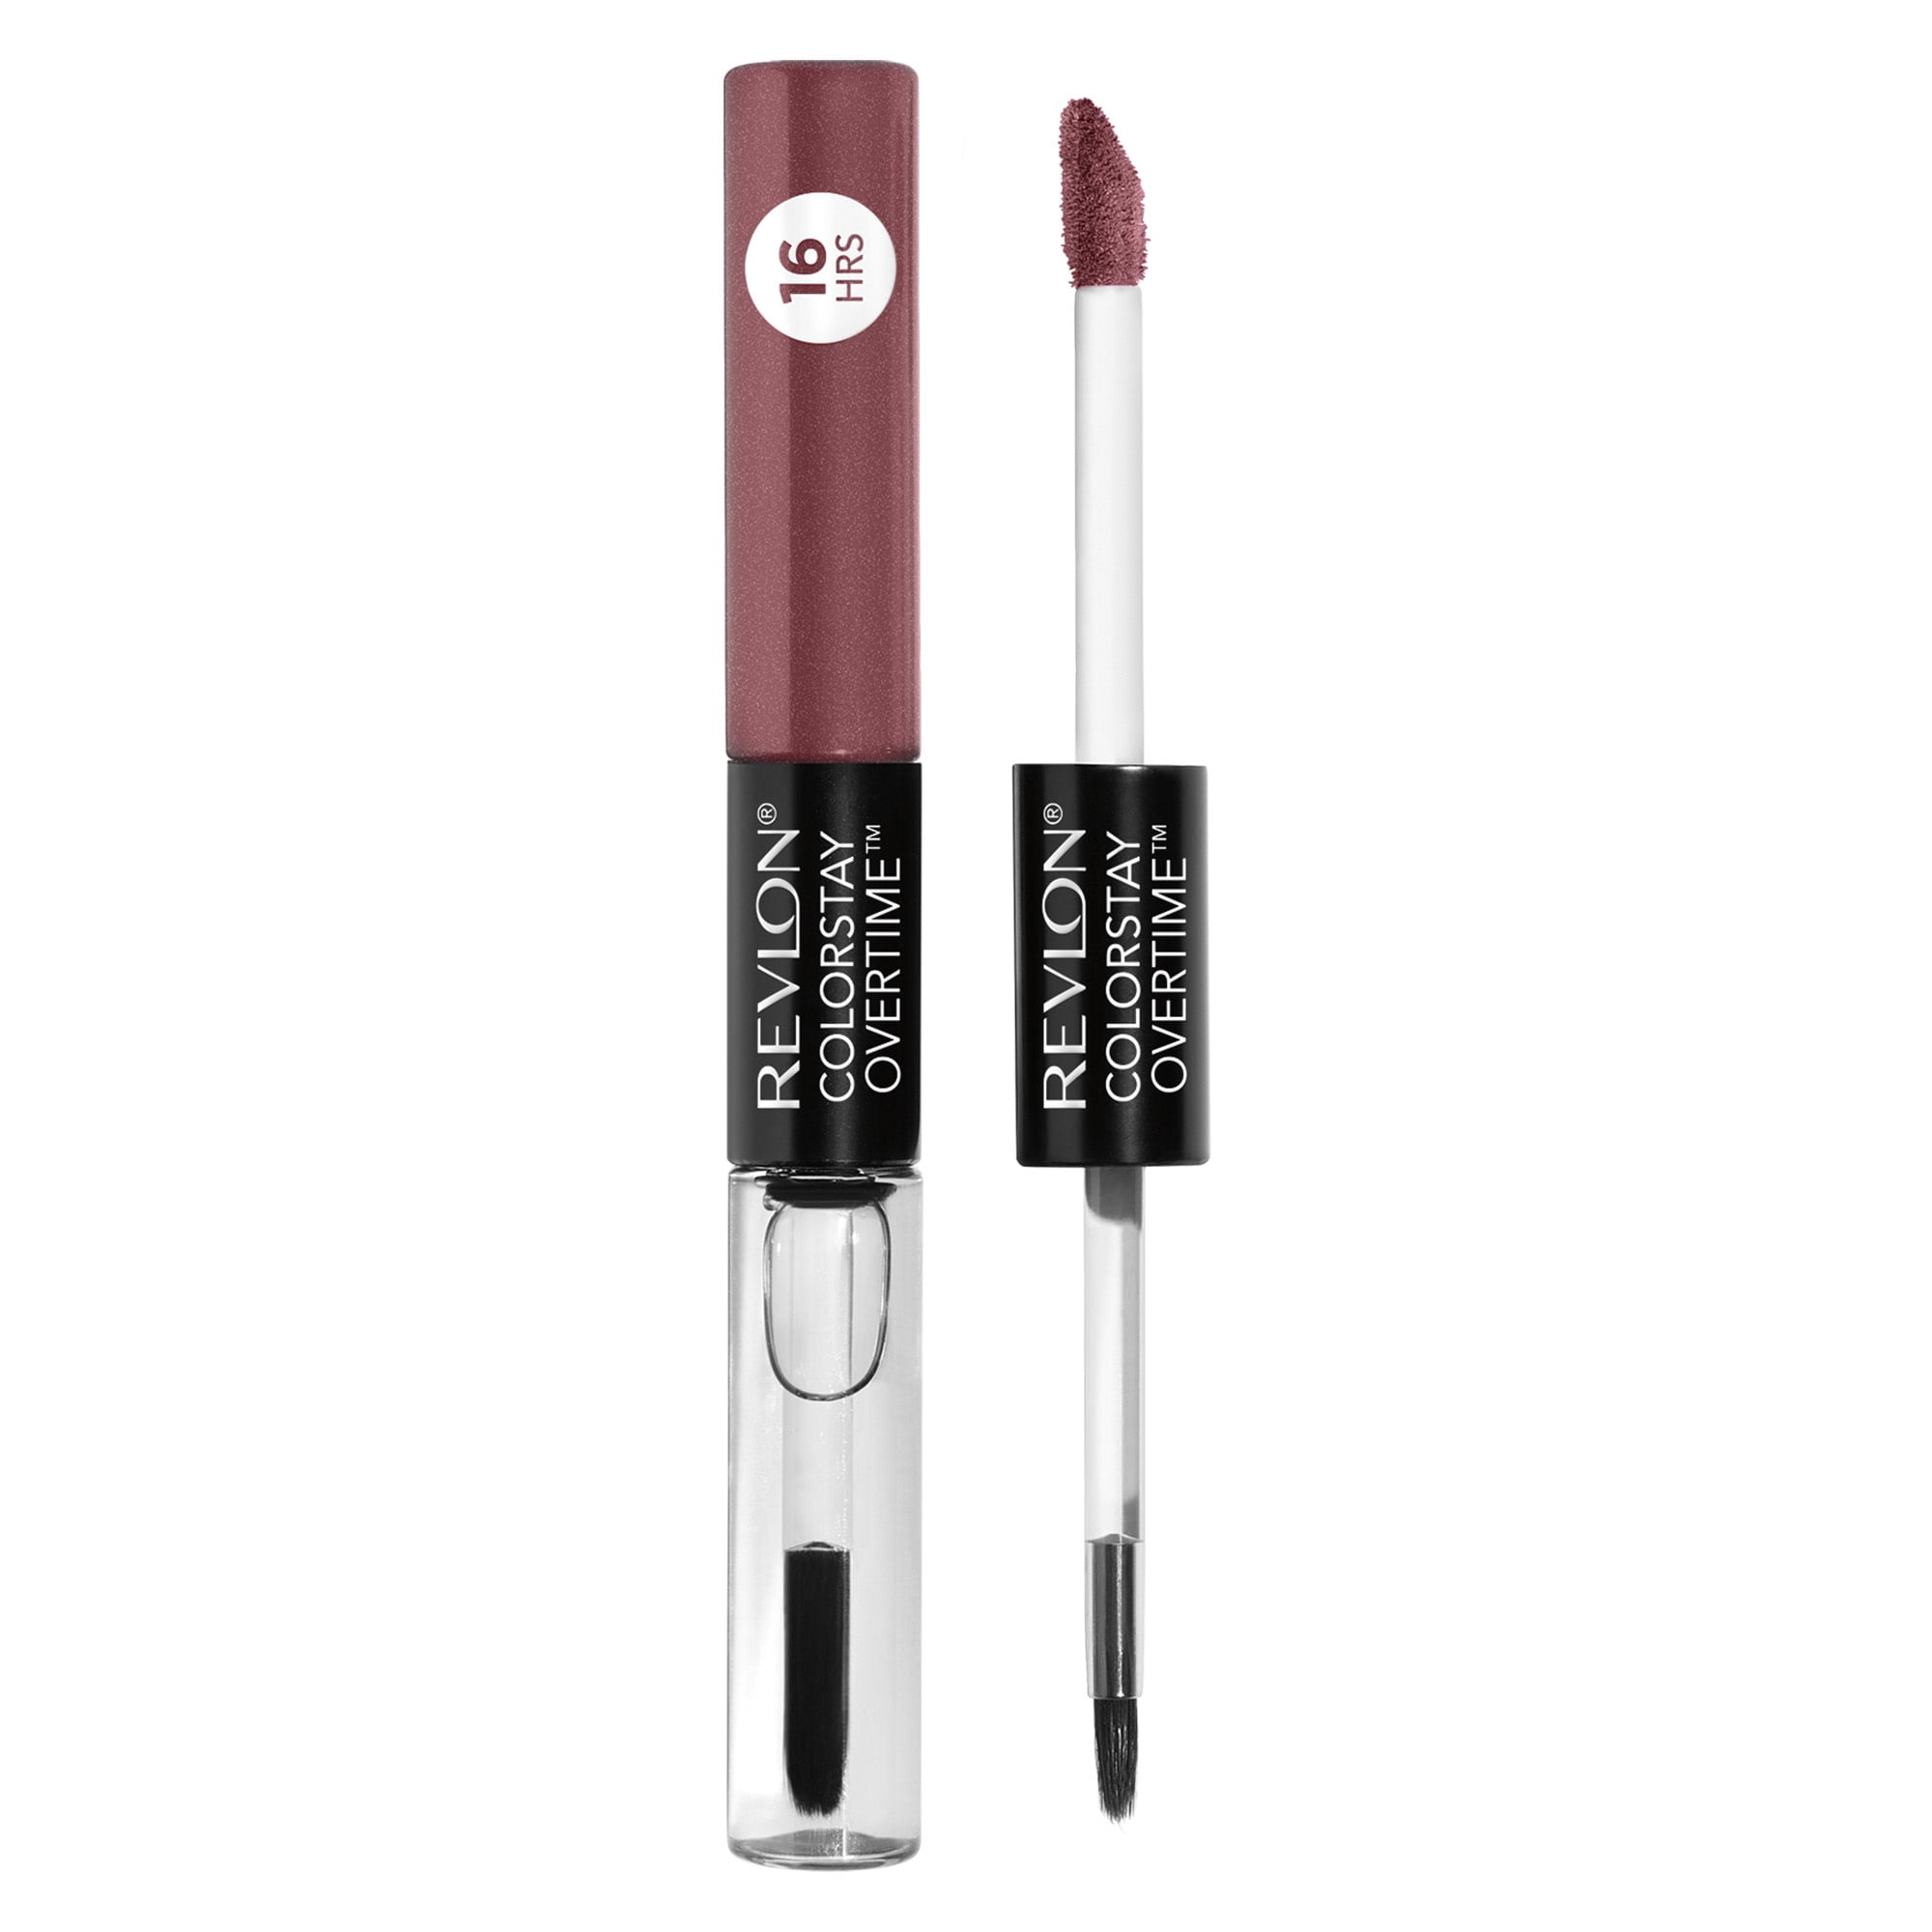 Revlon Liquid Lipstick with Clear Lip Gloss by Revlon, ColorStay Face Makeup, Overtime Lipcolor, Dual Ended with Vitamin E in Plum / Berry, 370 Everlasting Rum, 0.07 fl oz